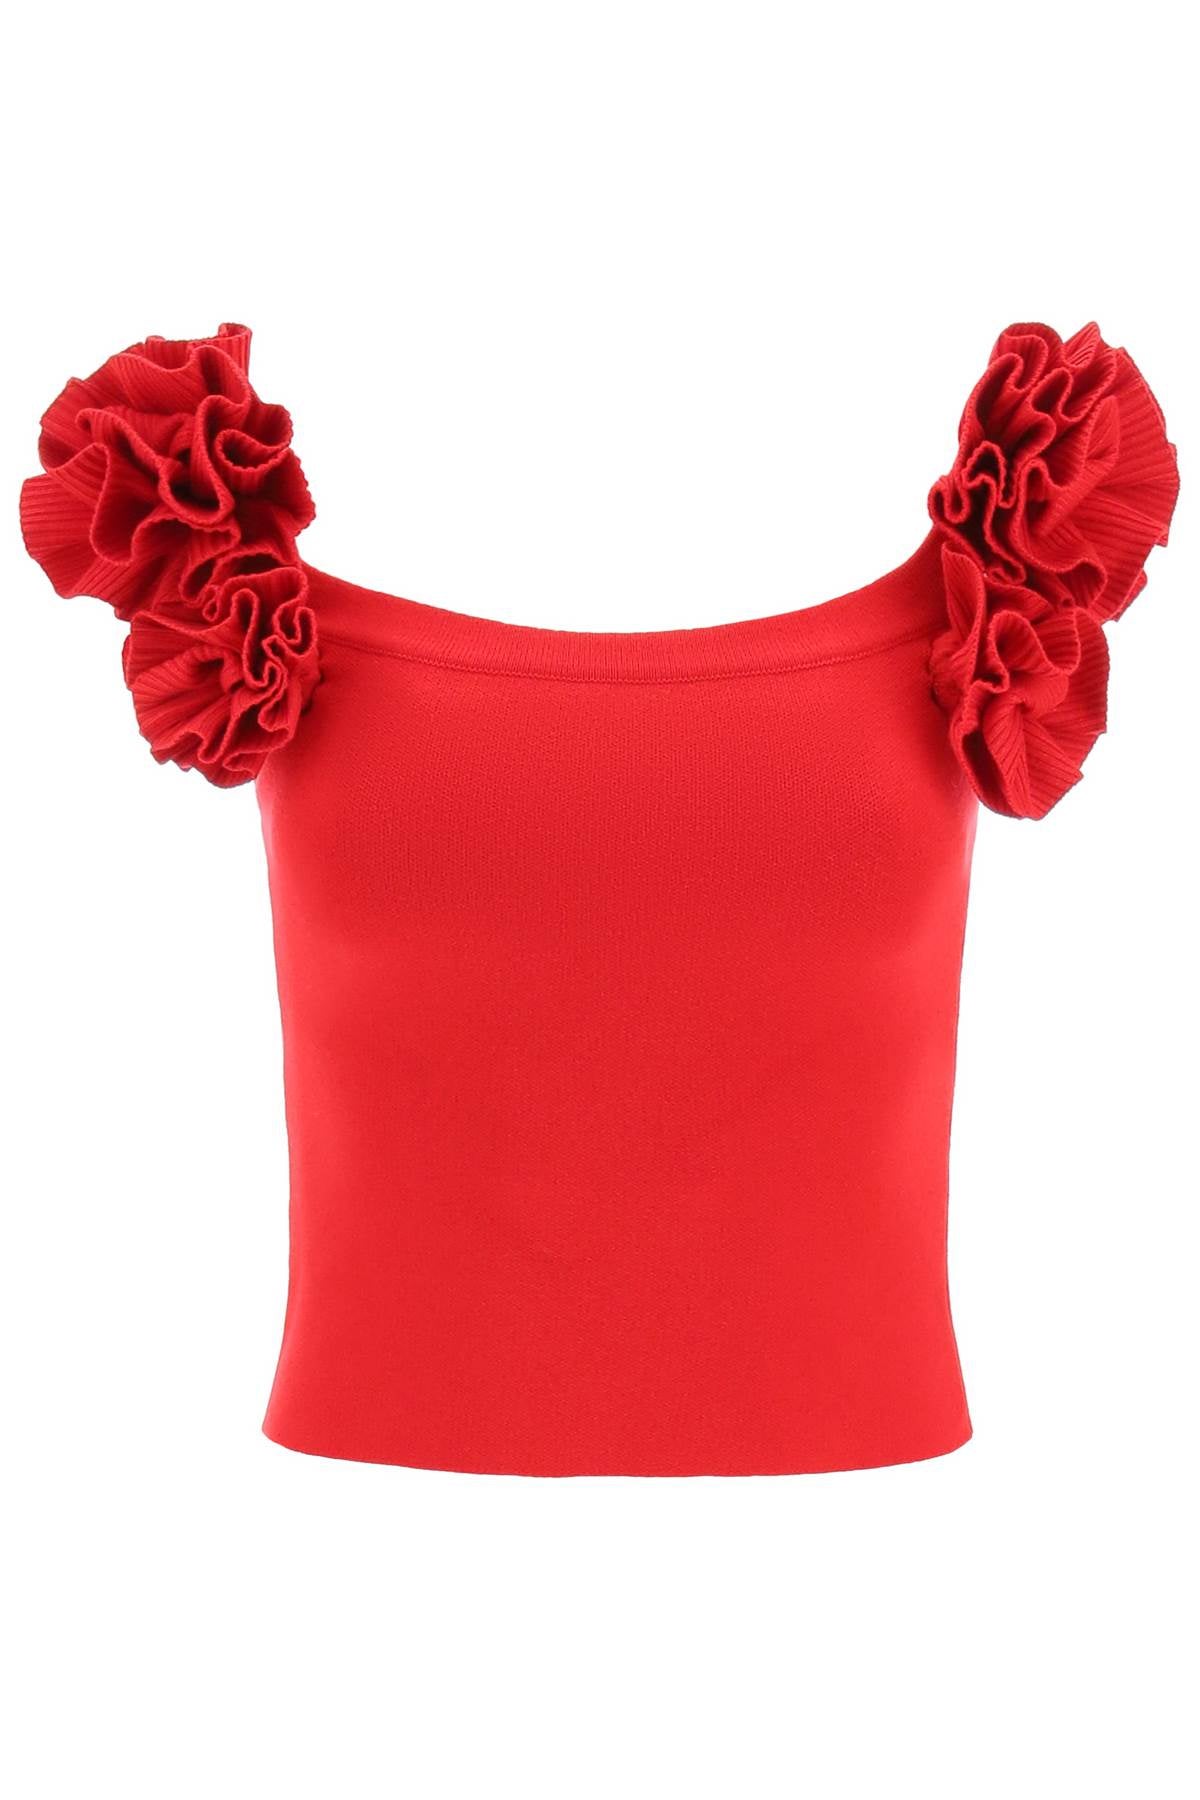 Magda butrym fitted top with roses-0